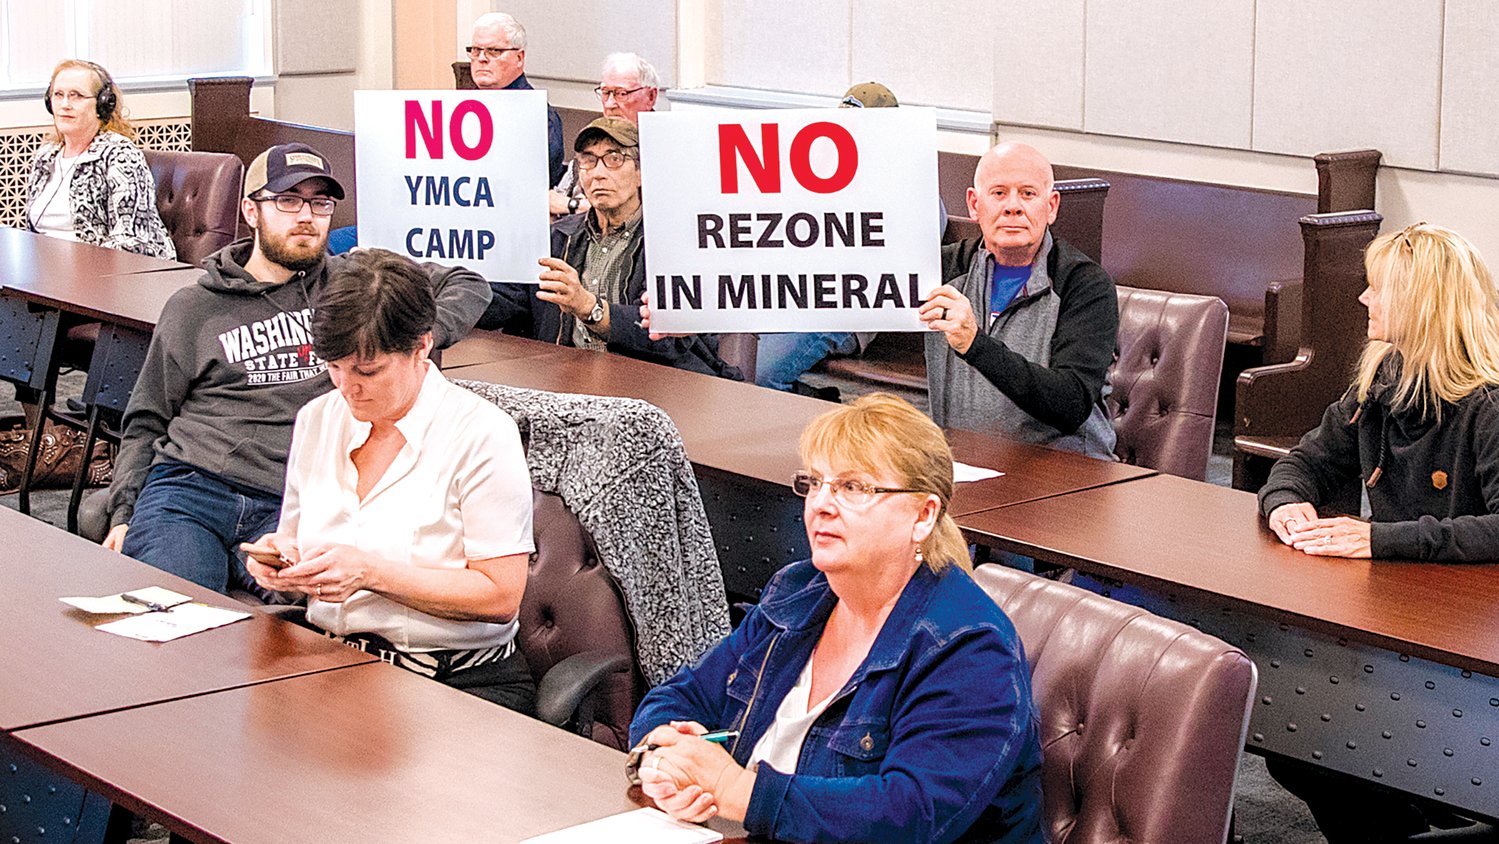 Dave Cunningham and Mike Heinz hold signs during a public hearing held by the Lewis County Planning Commission at the Lewis County Courthouse in Chehalis Tuesday evening on a rezone proposal north of Mineral Lake.